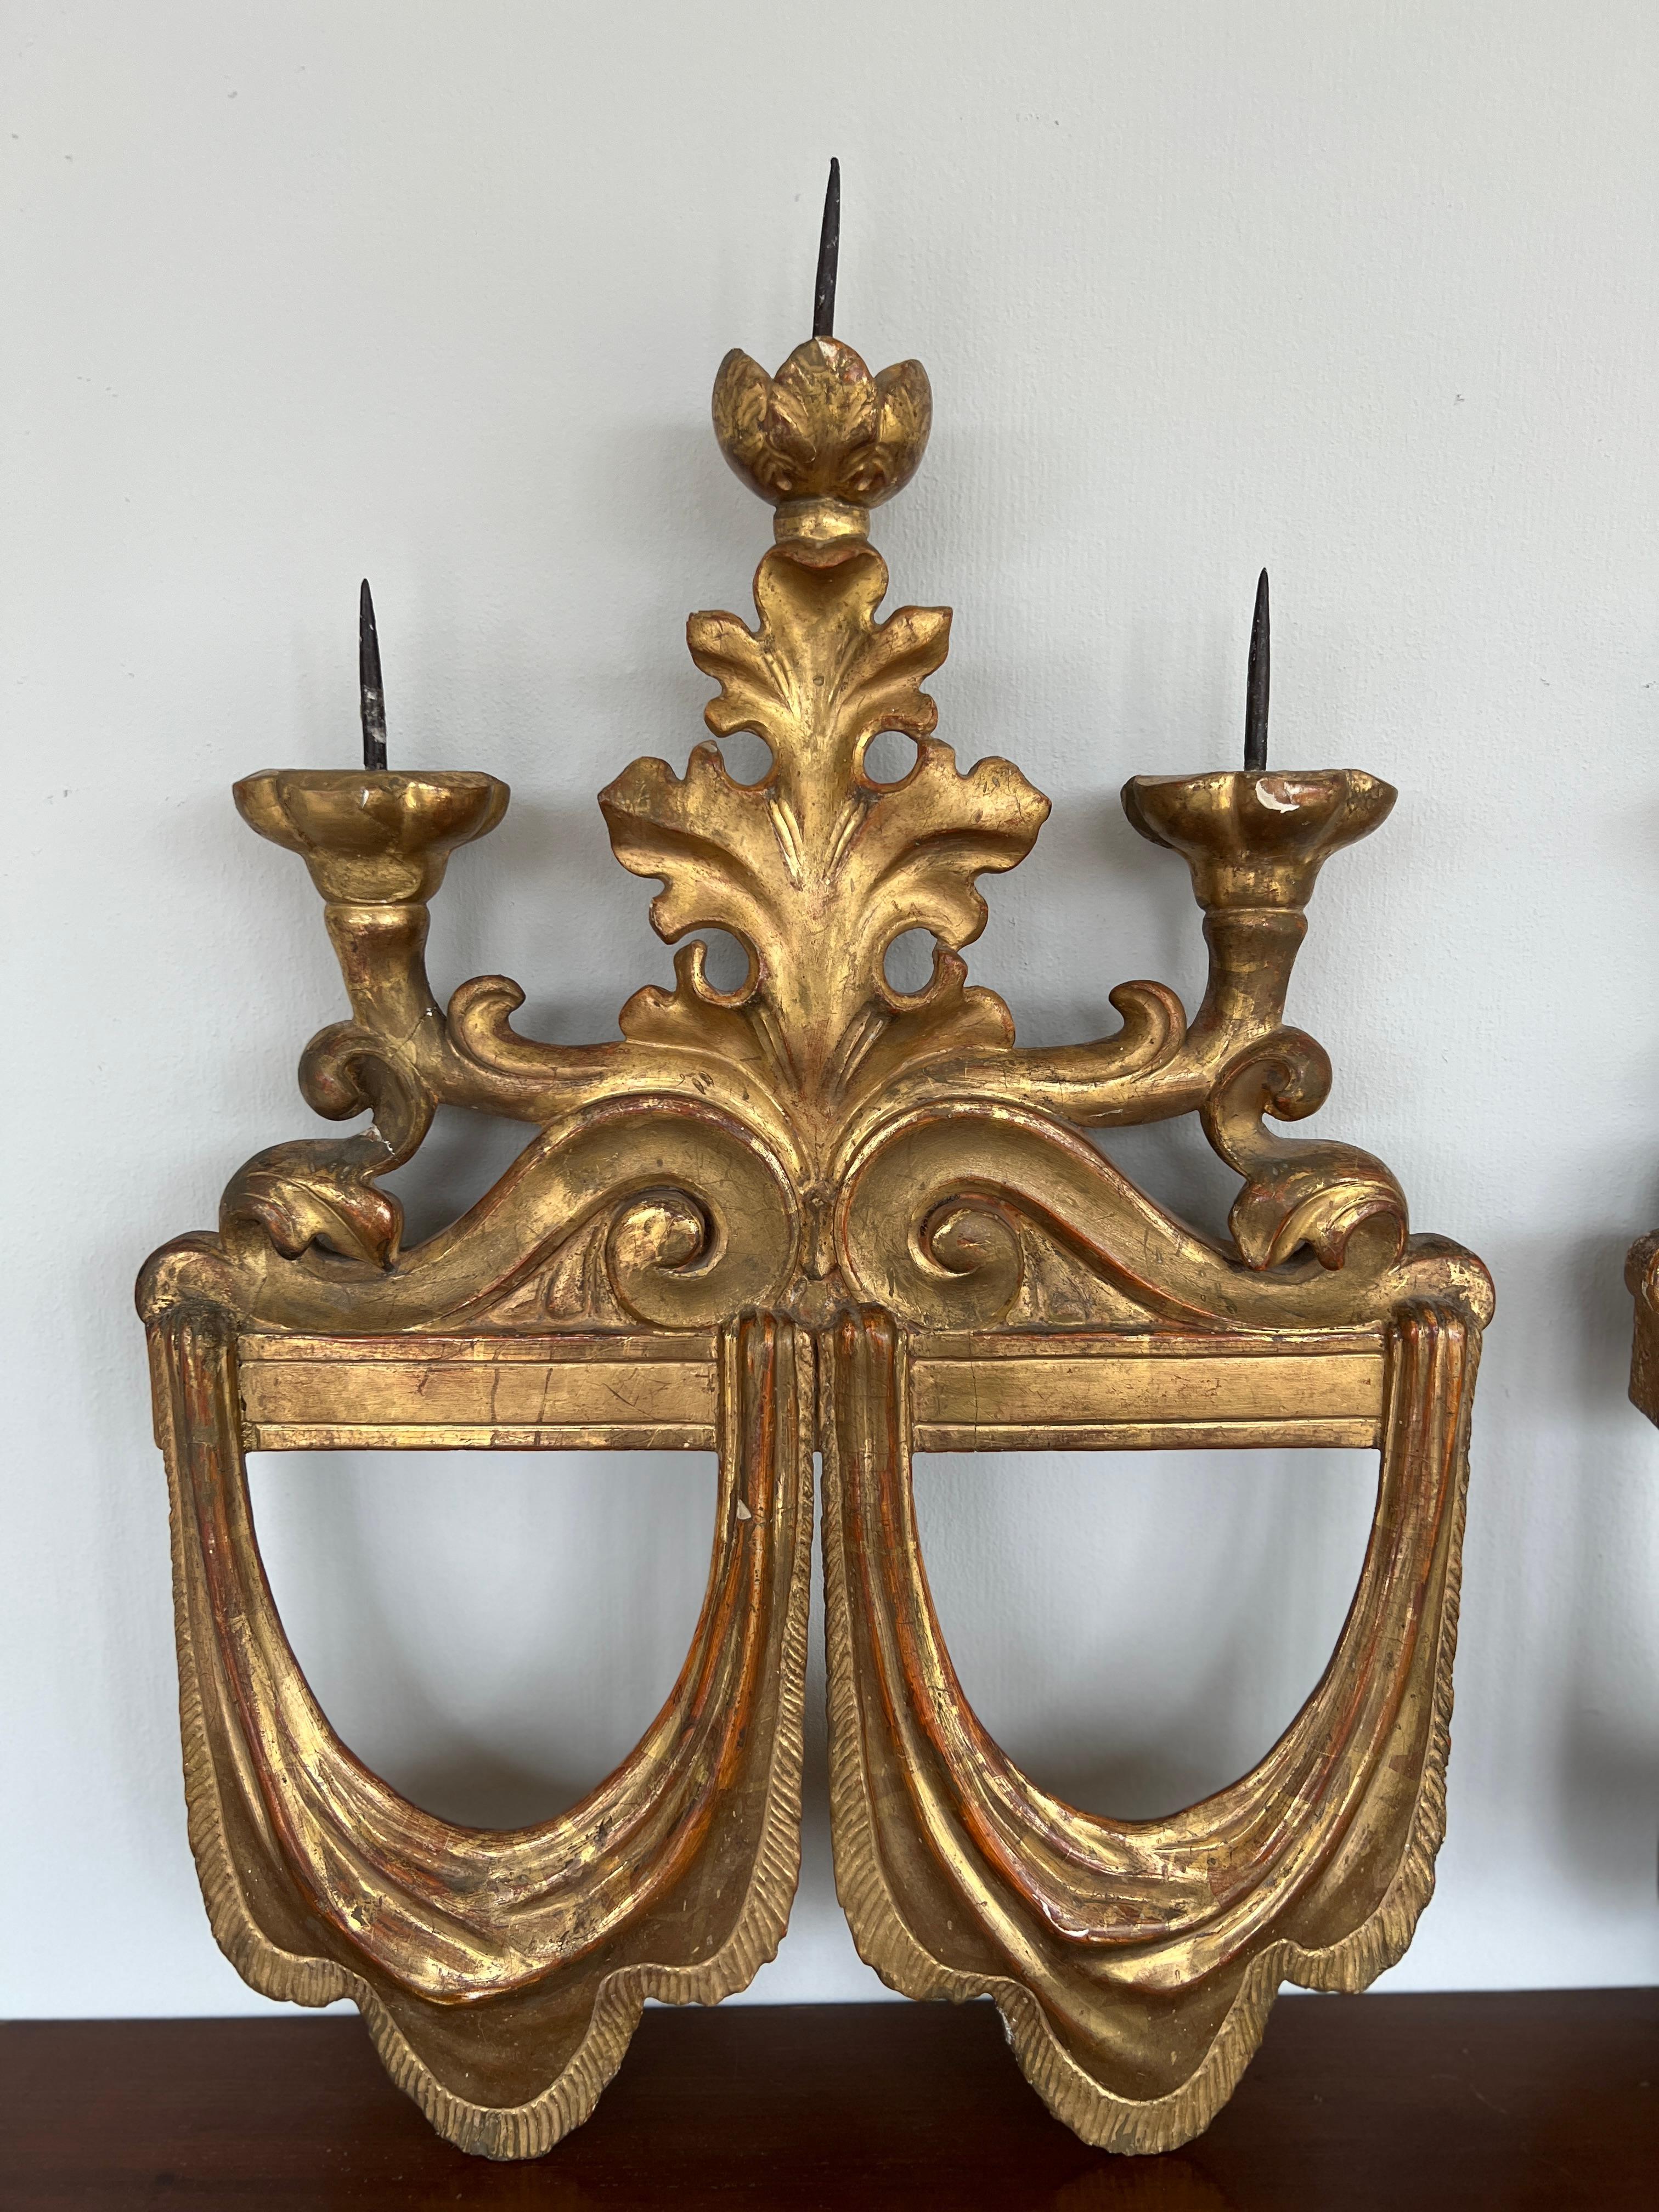 Italy, circa 1890.

A pair of antique giltwood 3-light candle sconces. Each sconce features finely detailed and hand carved rococo style candelabra arms, supporting sharp iron prickets. Highly detailed and realistic double draped water gilt hangings